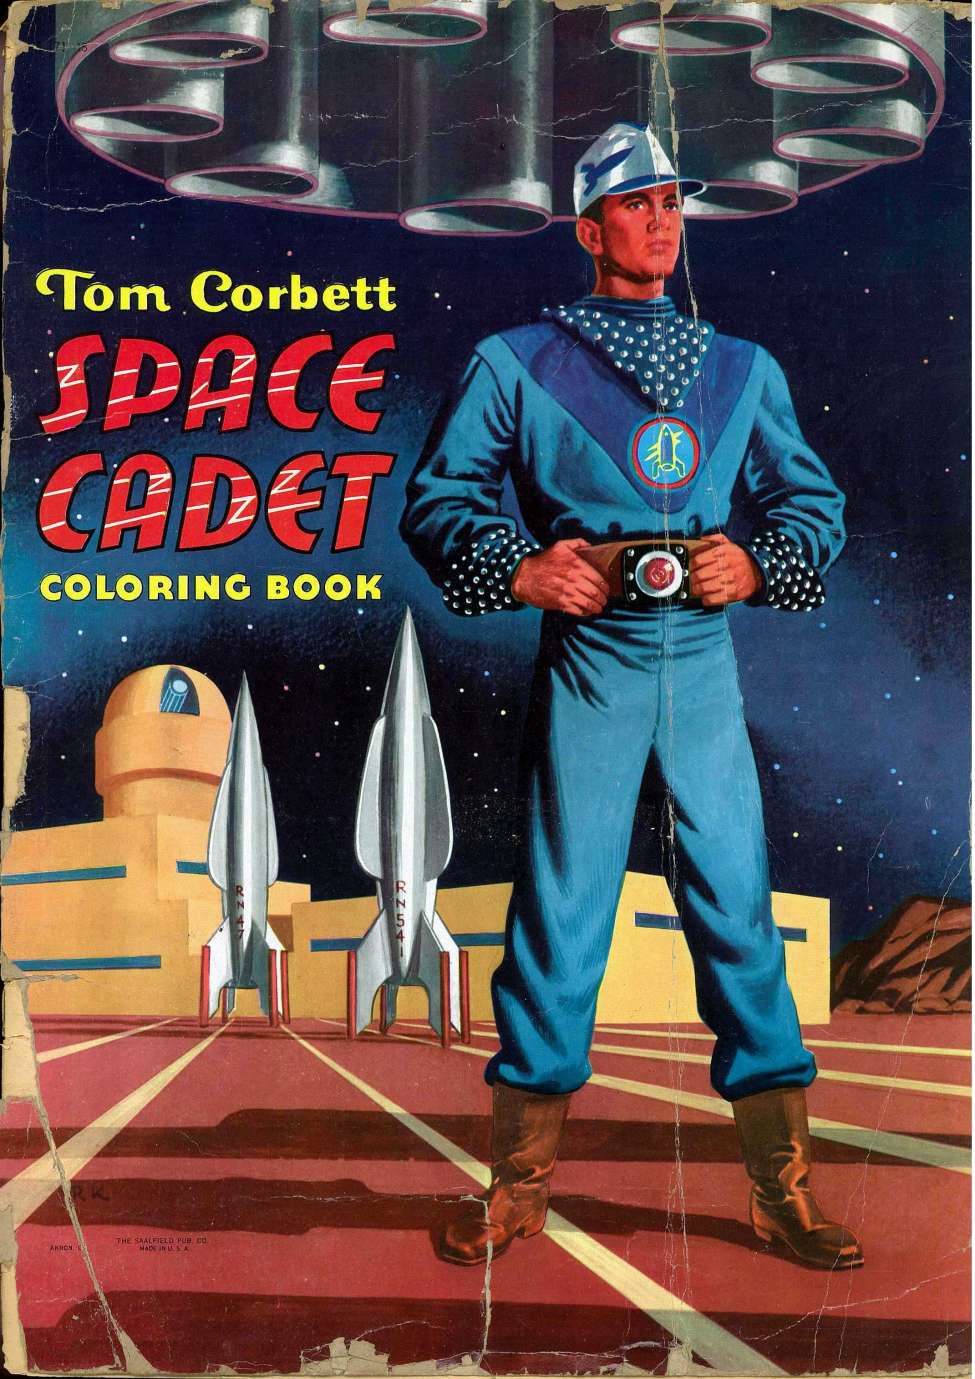 Comic Book Cover For Tom Corbett, Space Cadet Coloring Book